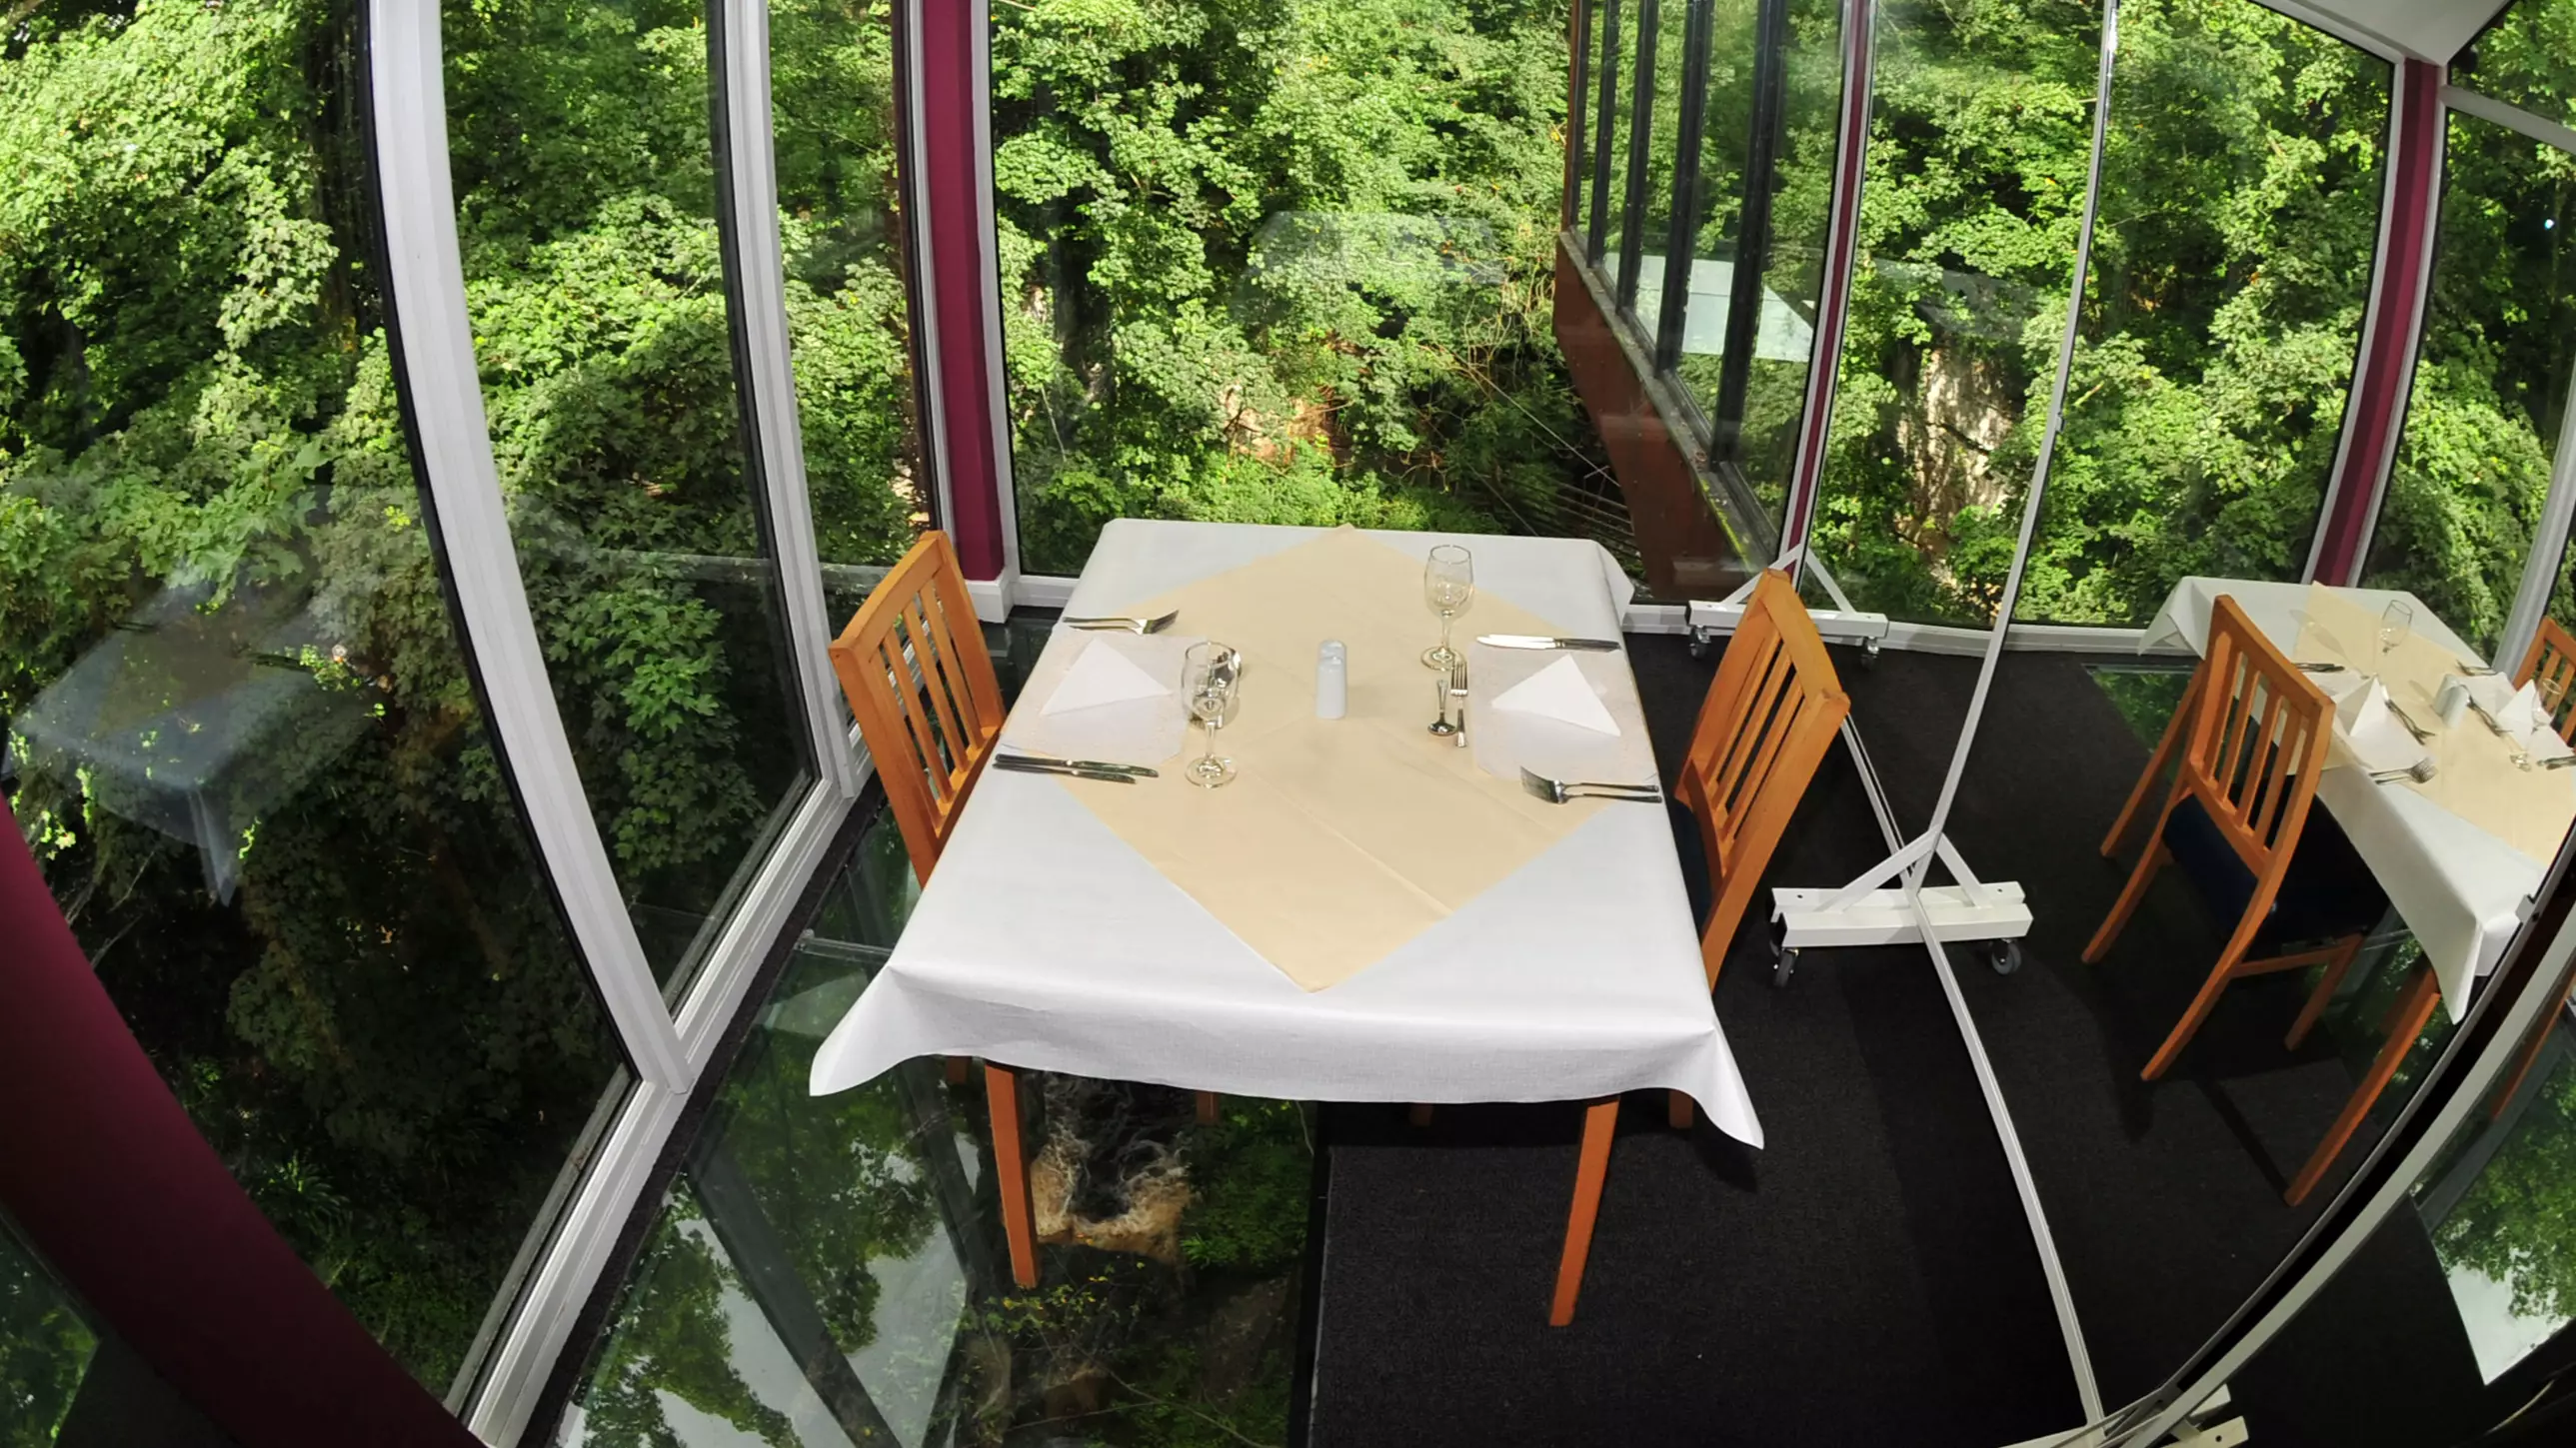 You Can Now Dine In A Glass Restaurant Overlooking A 80ft Gorge In Yorkshire